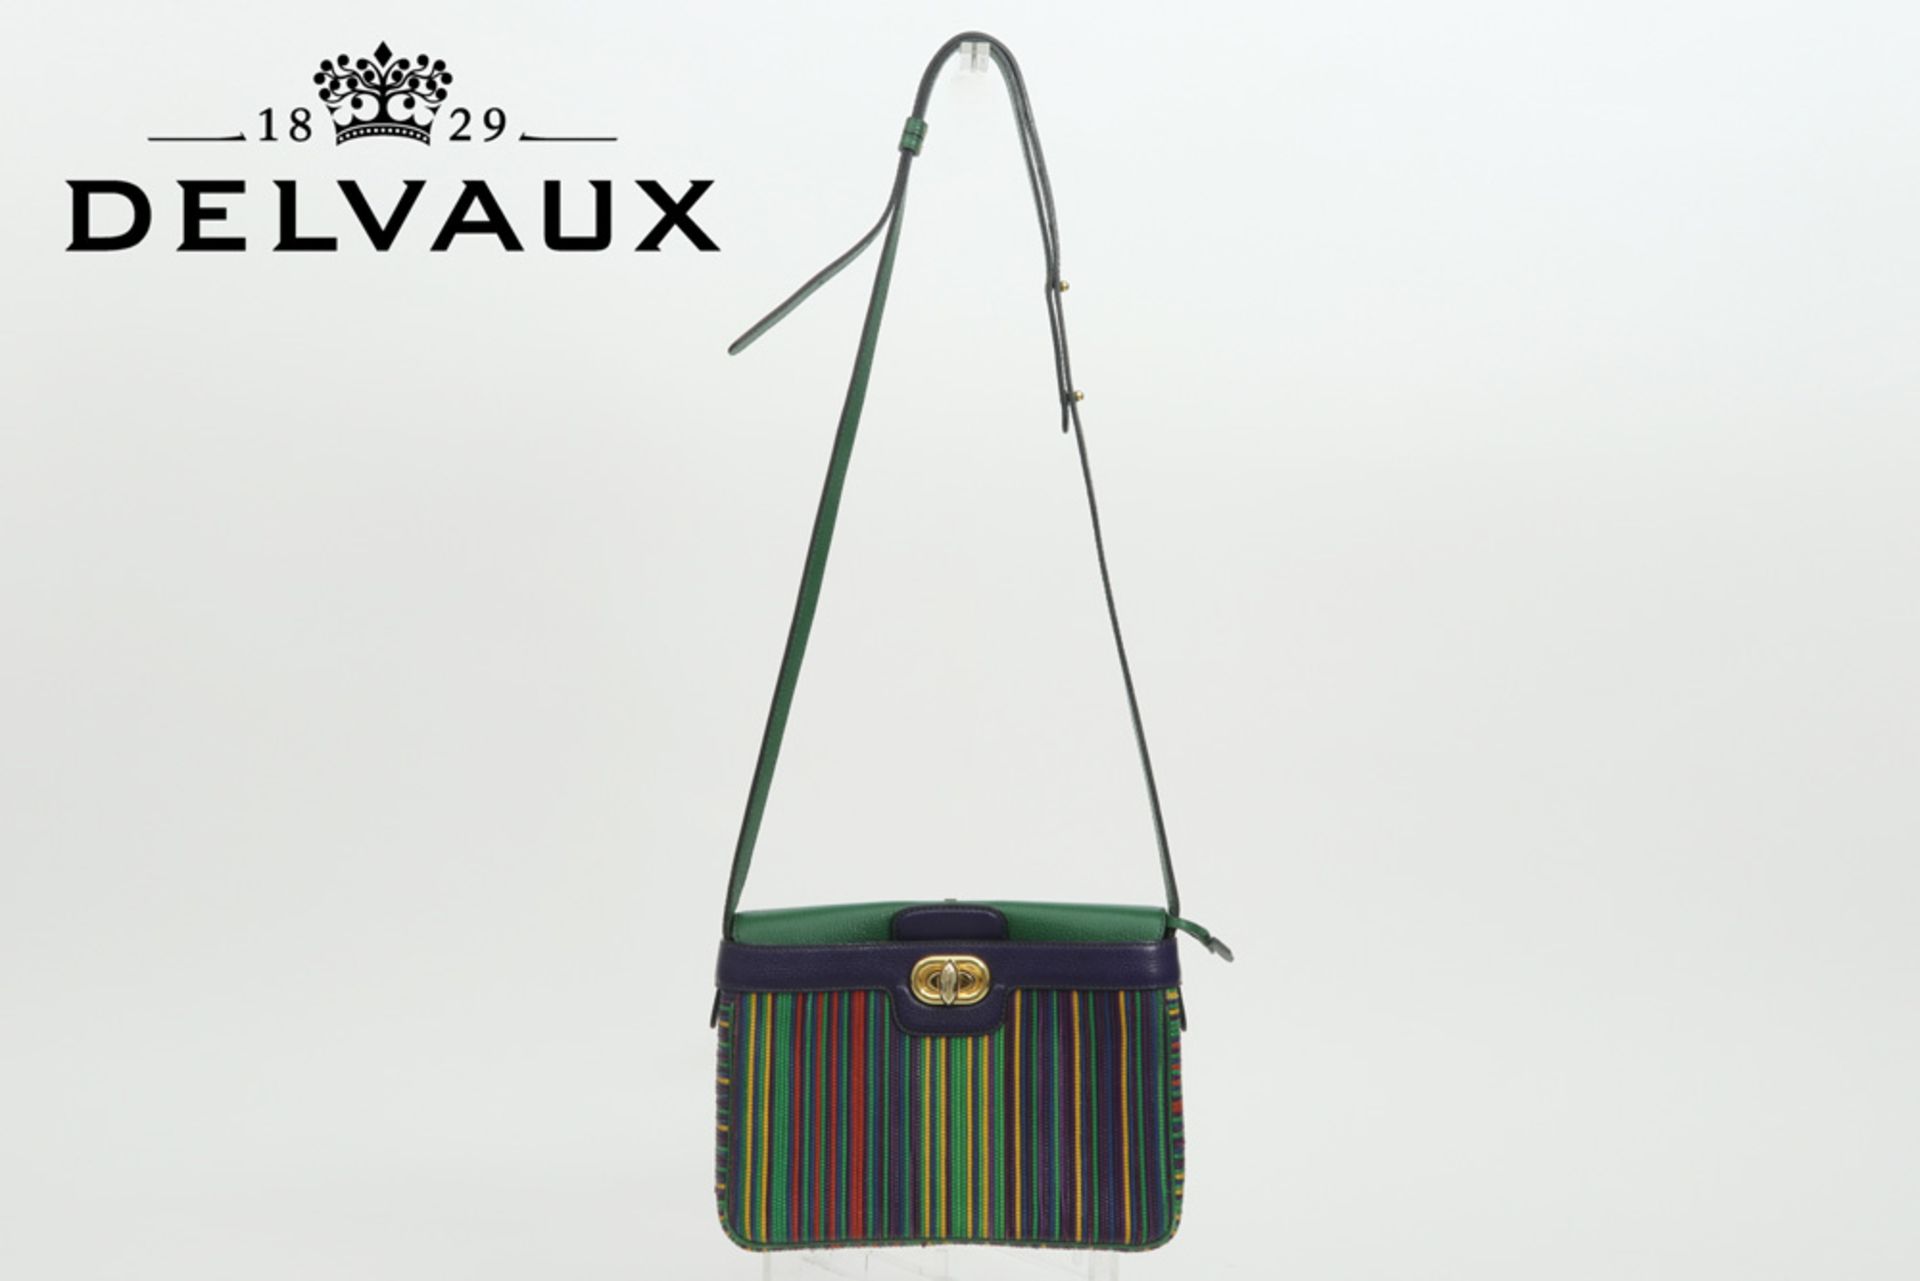 Delvaux marked handbag with its purse, keychain and mirror - with its bag and box || DELVAUX zeer